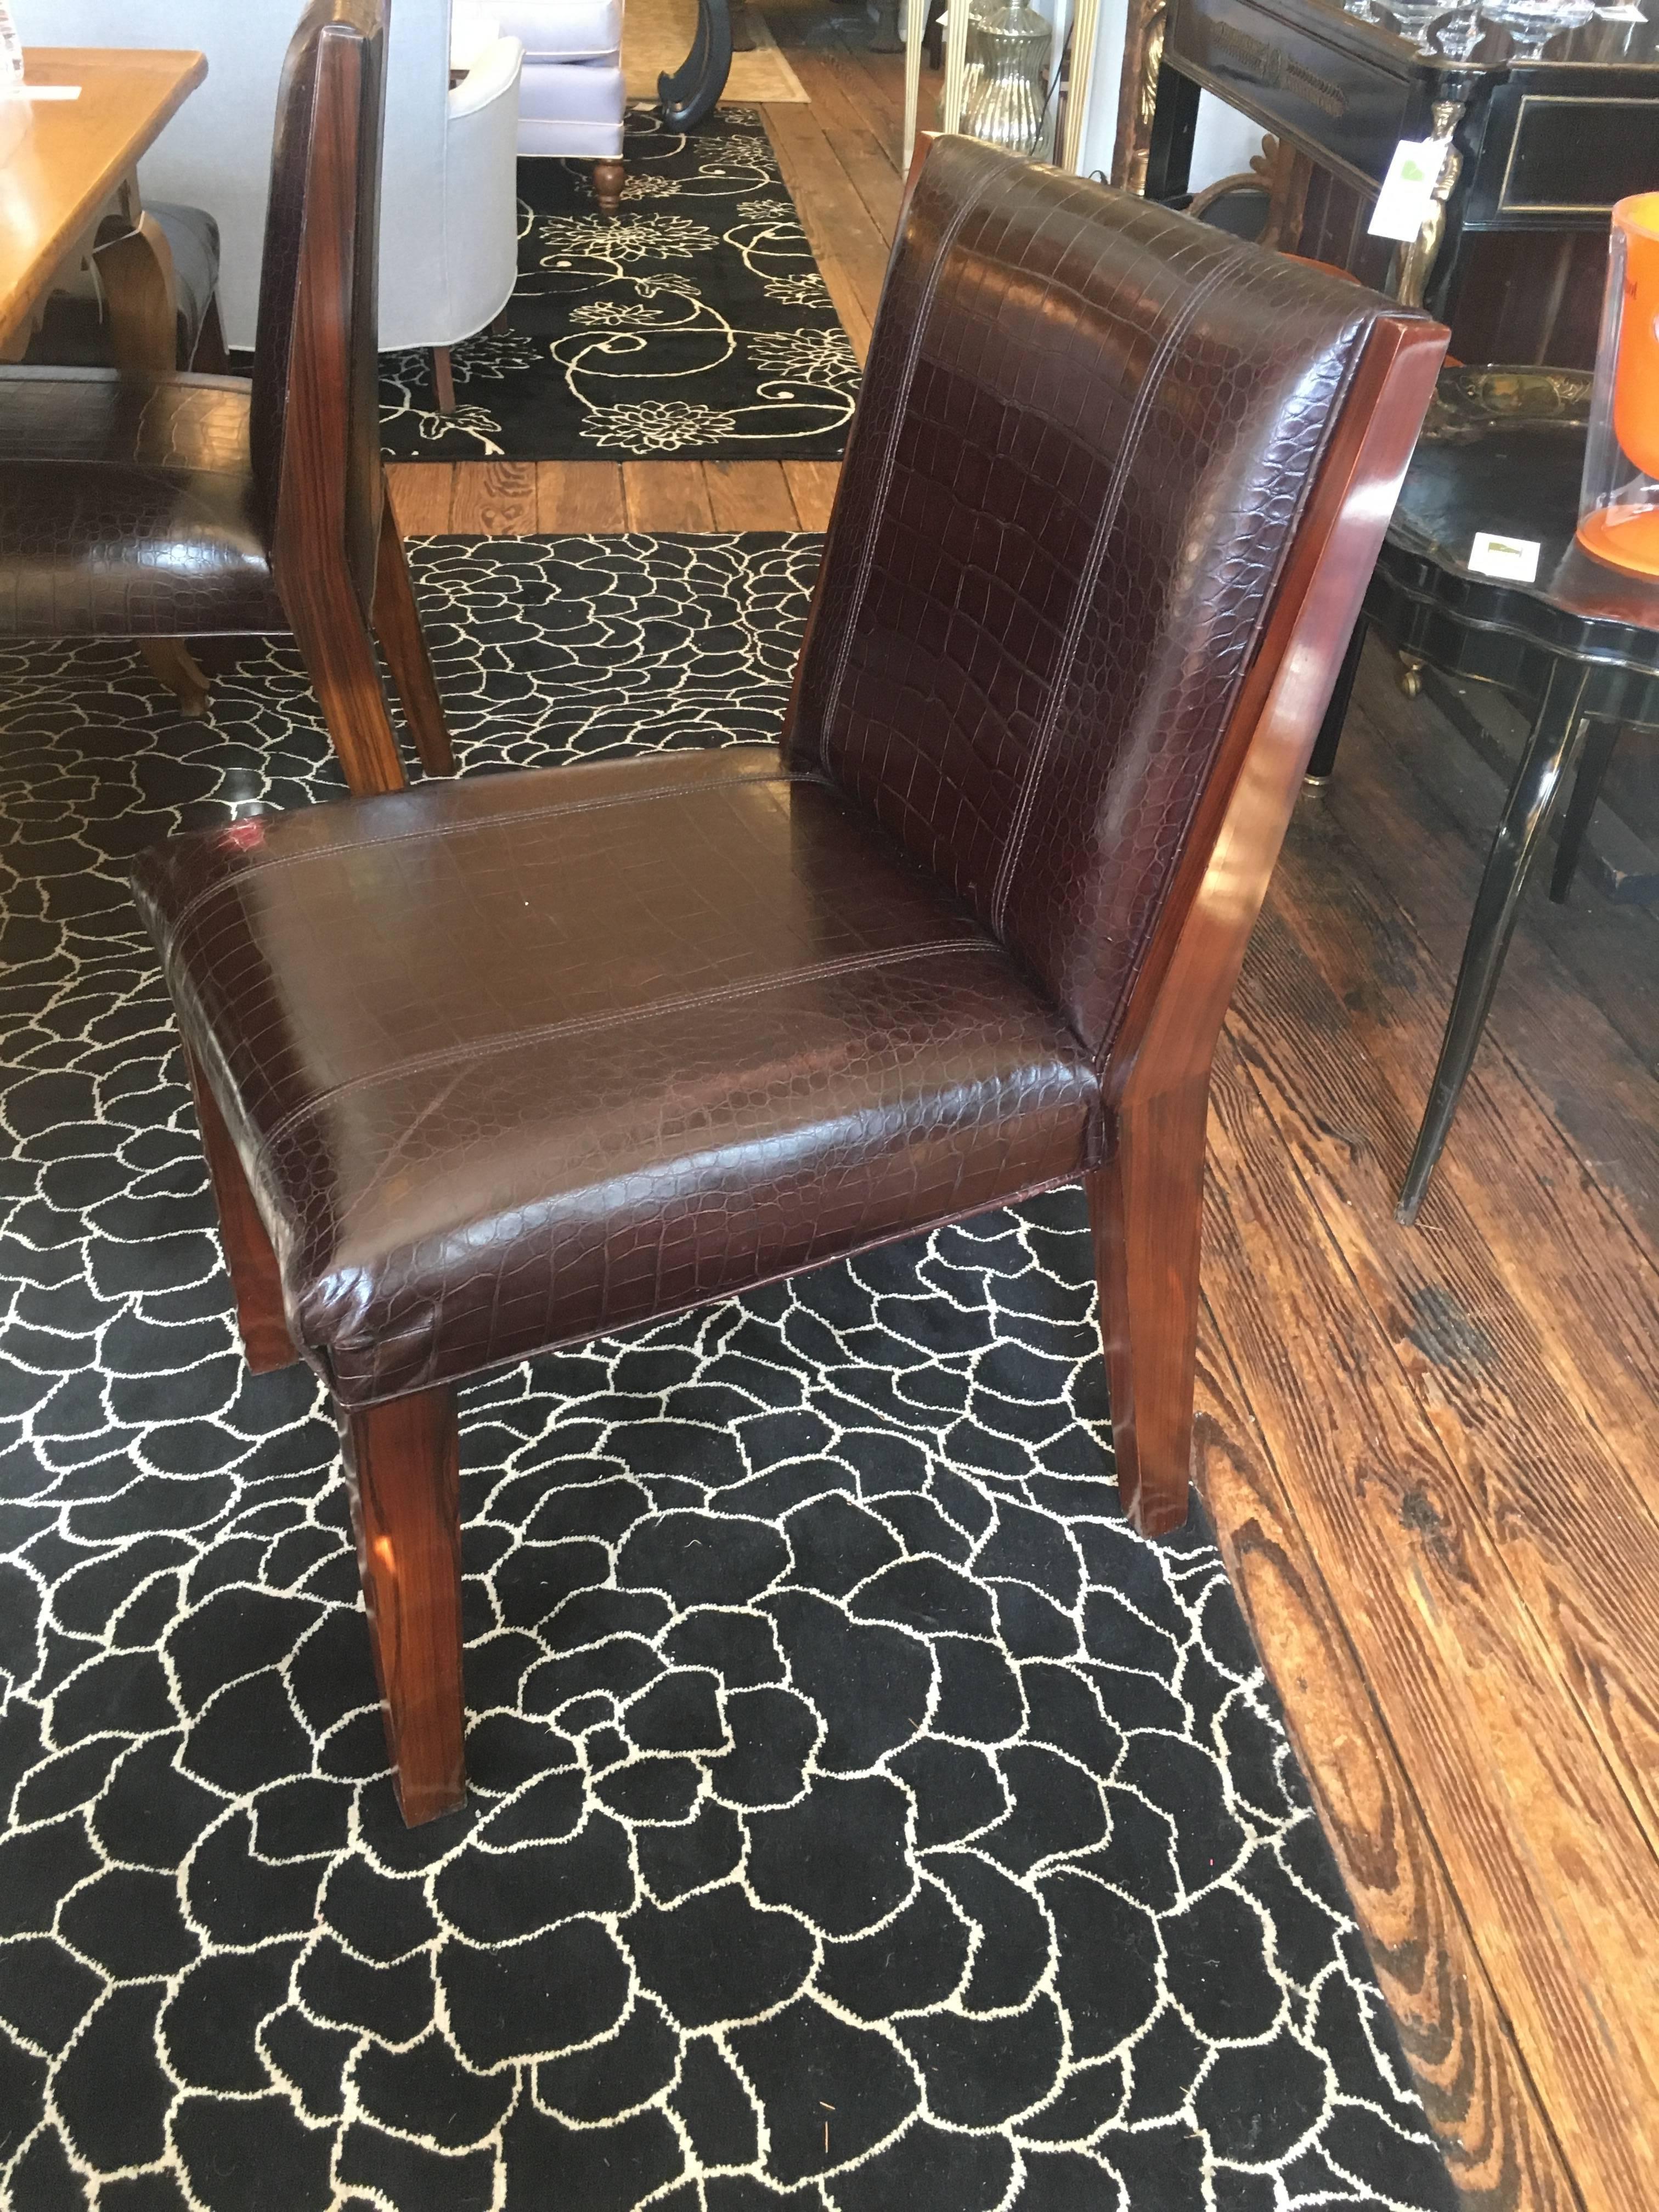 Very handsome traditional Ralph Lauren Modern Metropolis side dining chairs in a dark leather embossed with a crocodile pattern and sturdy dark wood legs (we think Rosewood) Designer label on underside of chairs. Originally $2000/chair
have